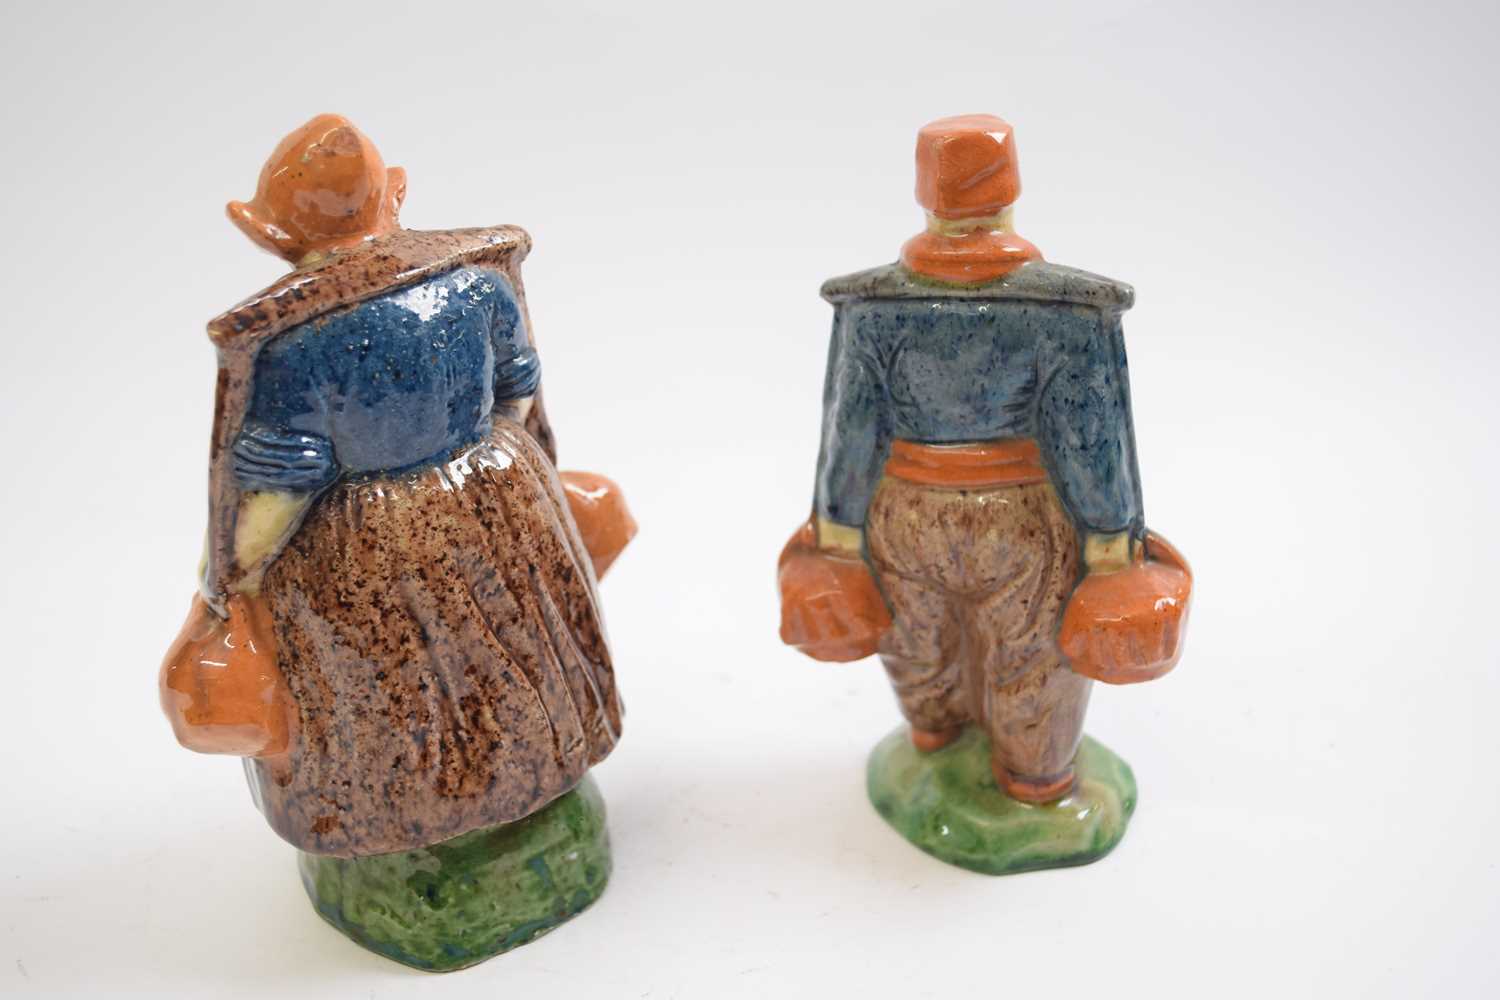 Pair of early 20th Century Dutch pottery figures of a boy and a girl in Maiolica style glazes - Image 2 of 3